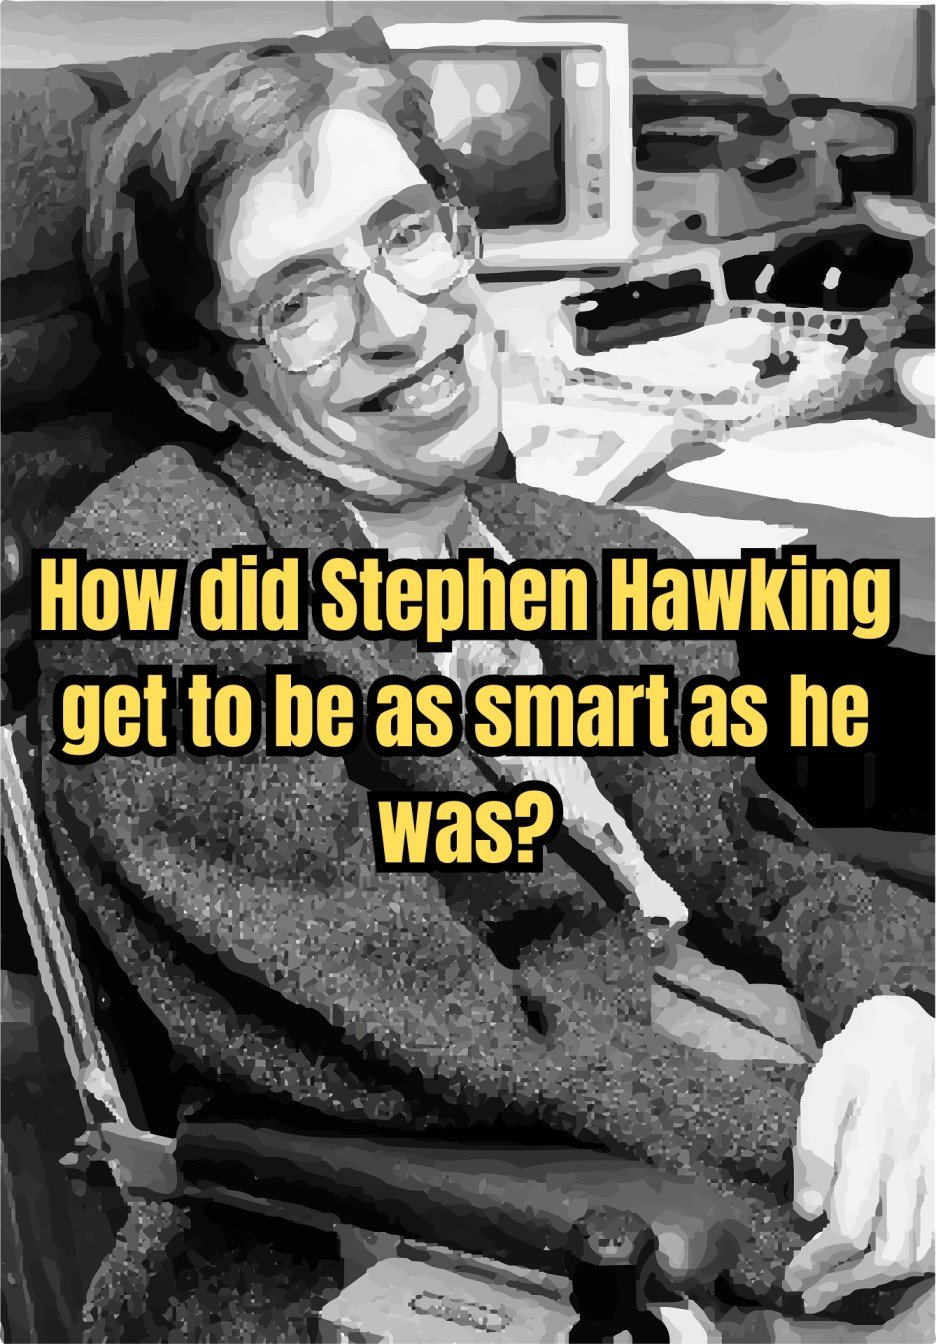 How did Stephen Hawking get to be as smart as he was?